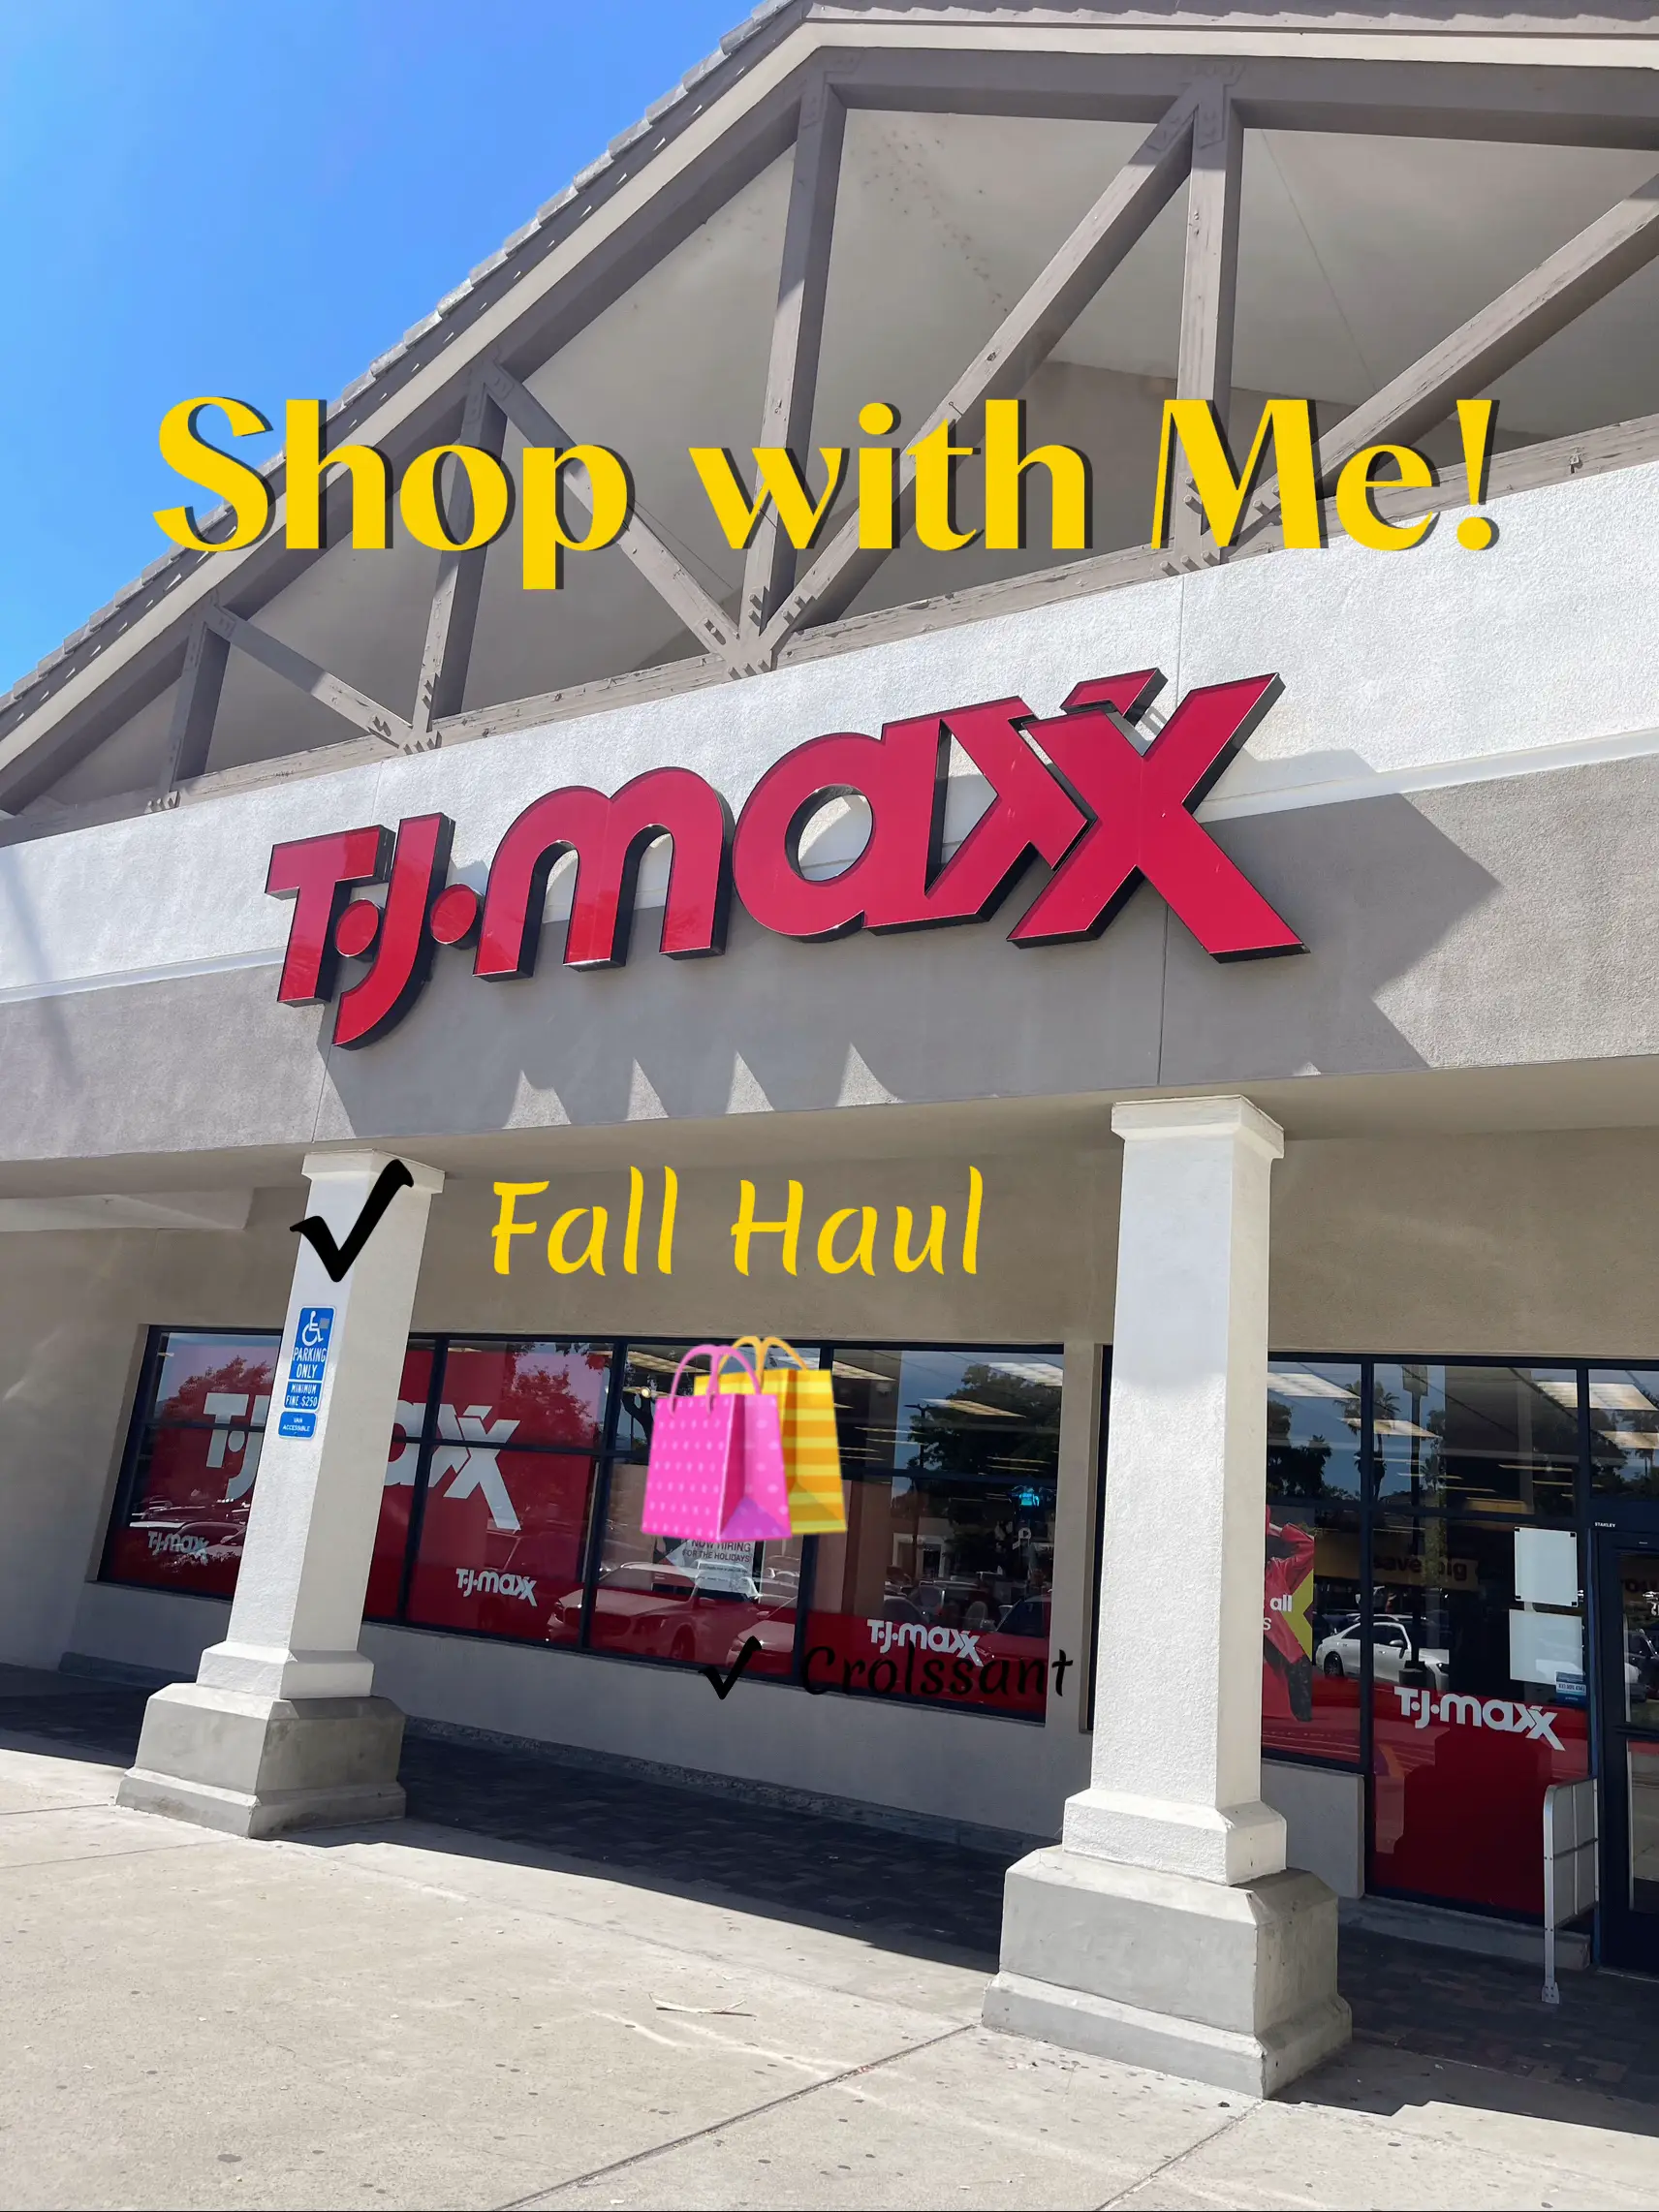 10 Things I'll Only Buy at T.J.Maxx and Marshalls - The Budget Babe